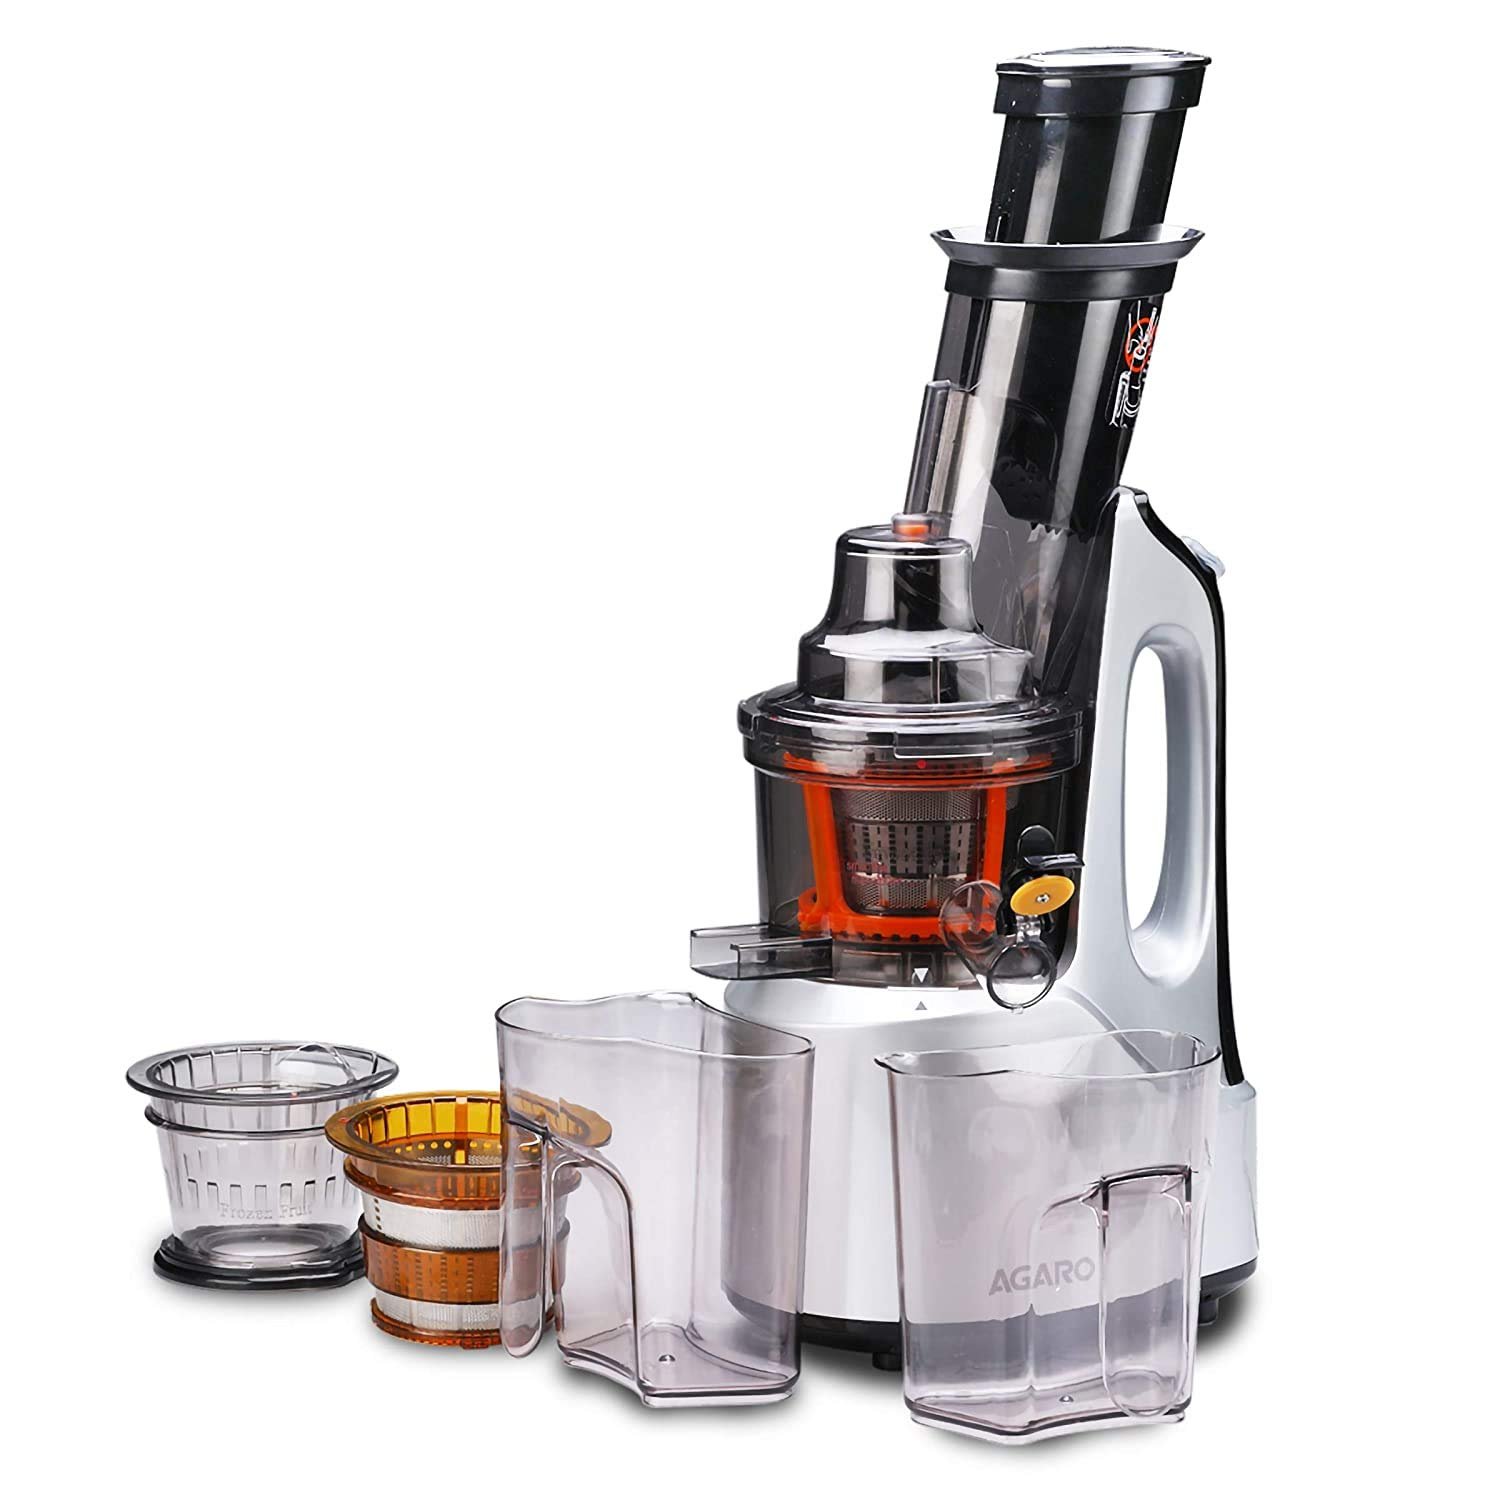 AGARO Imperial 240-Watt Slow Juicer with Cold Press Technology